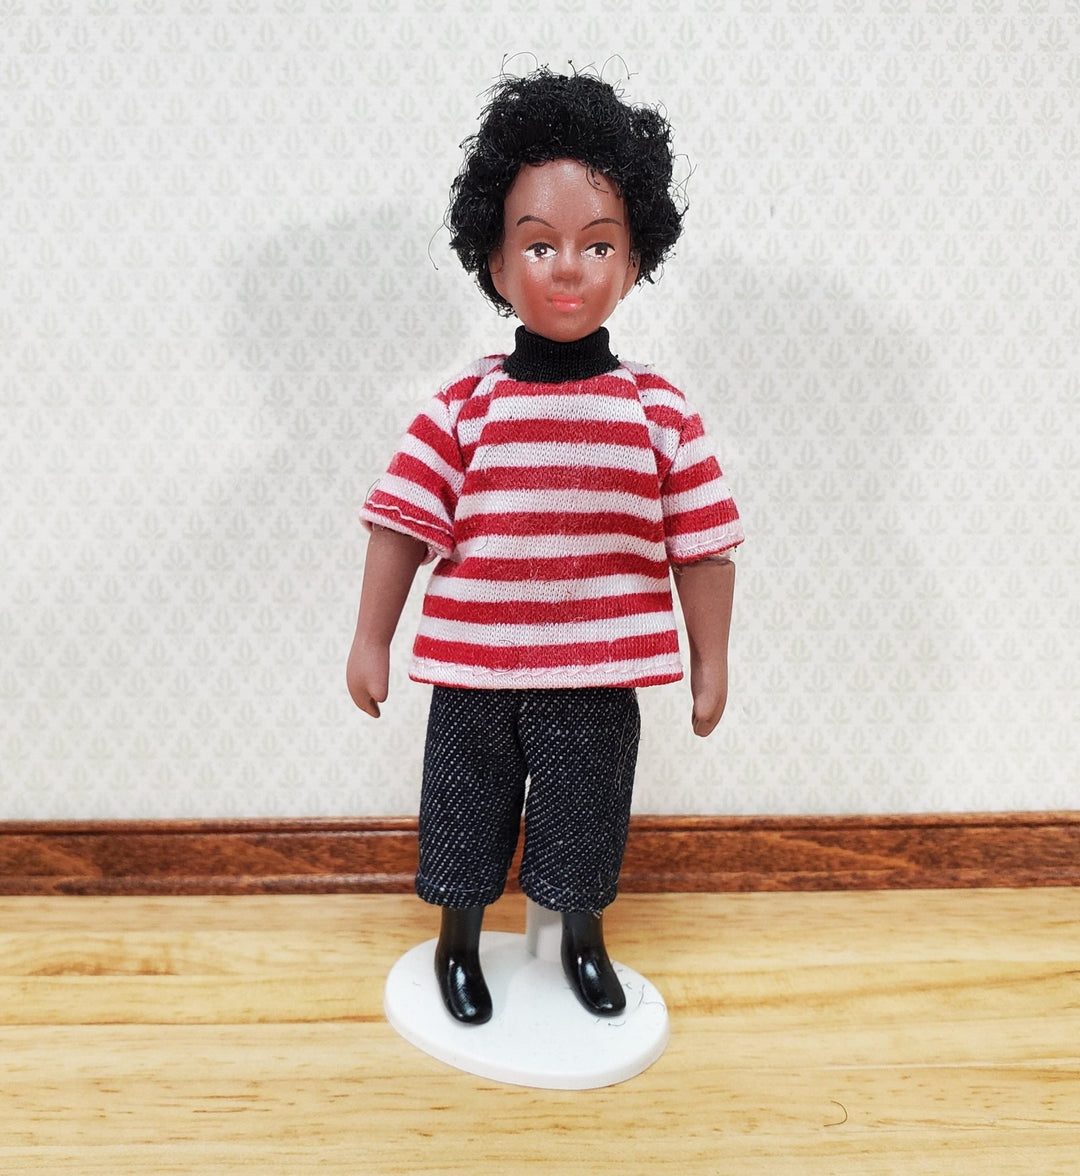 Dollhouse Modern Boy Black Brown Doll Male Son Brother Porcelain Poseable 1:12 Scale Miniature - Miniature Crush